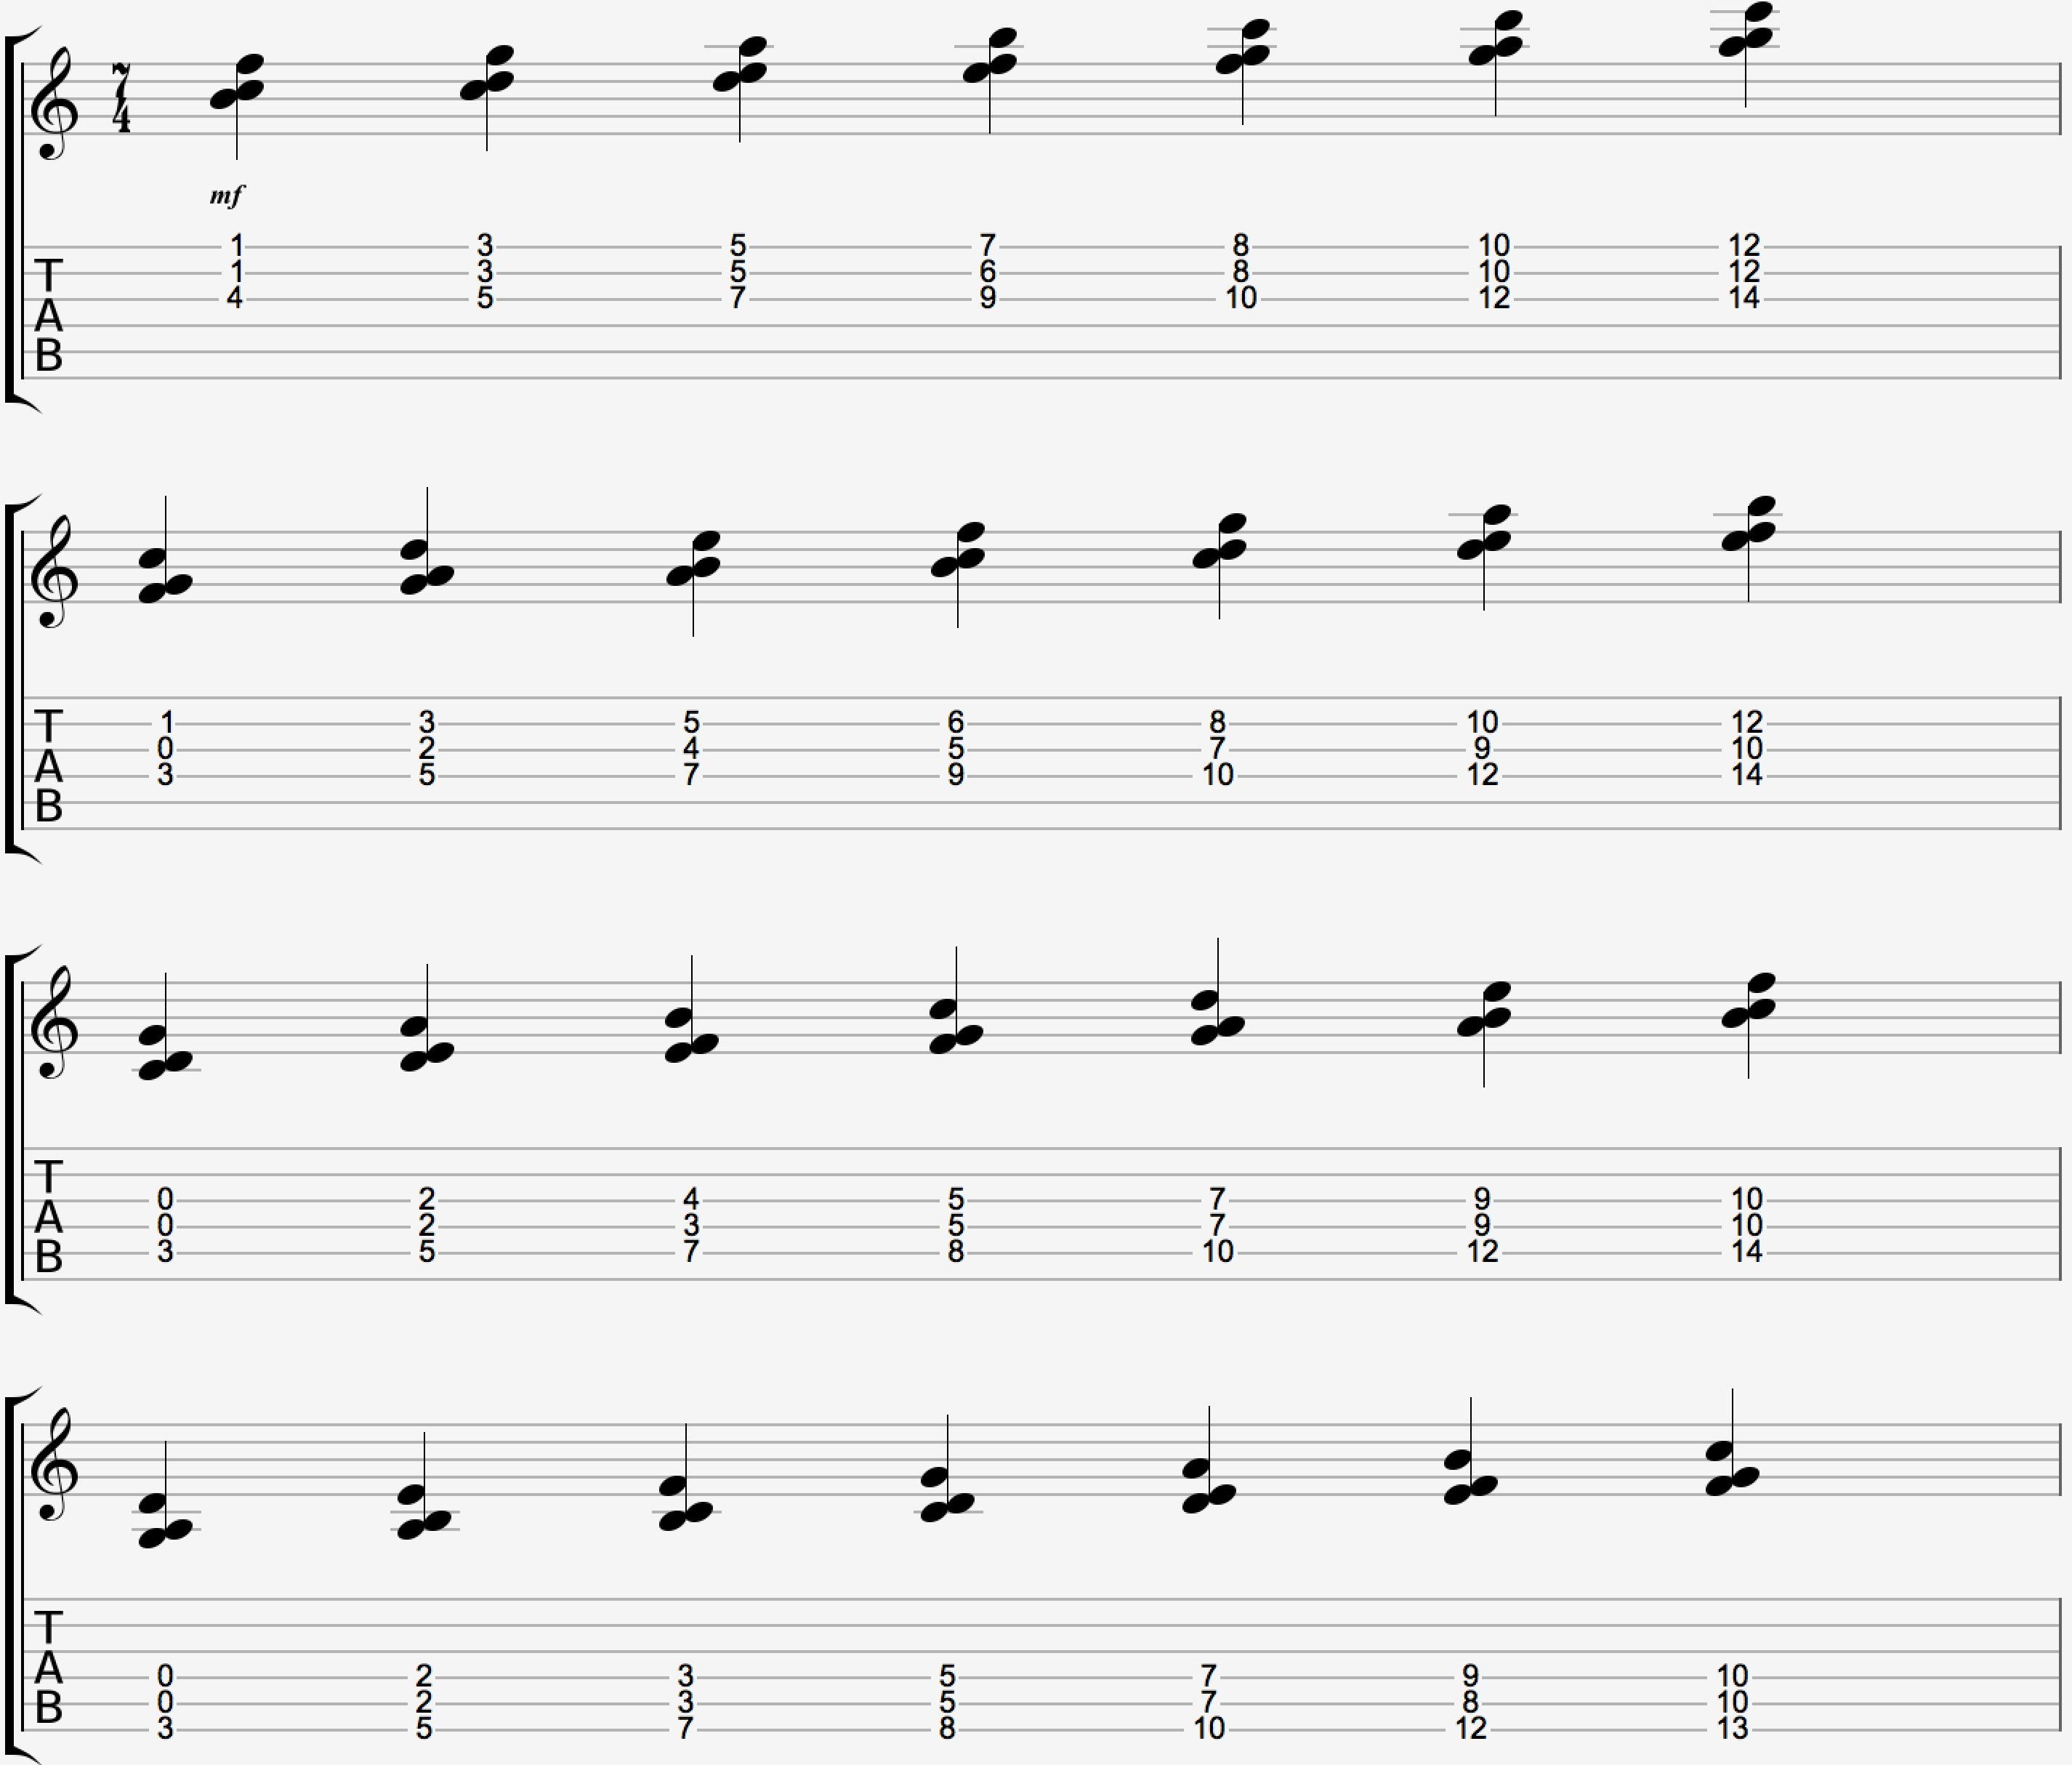 All the 2ndinversion 3-note quartal harmony chords in C 